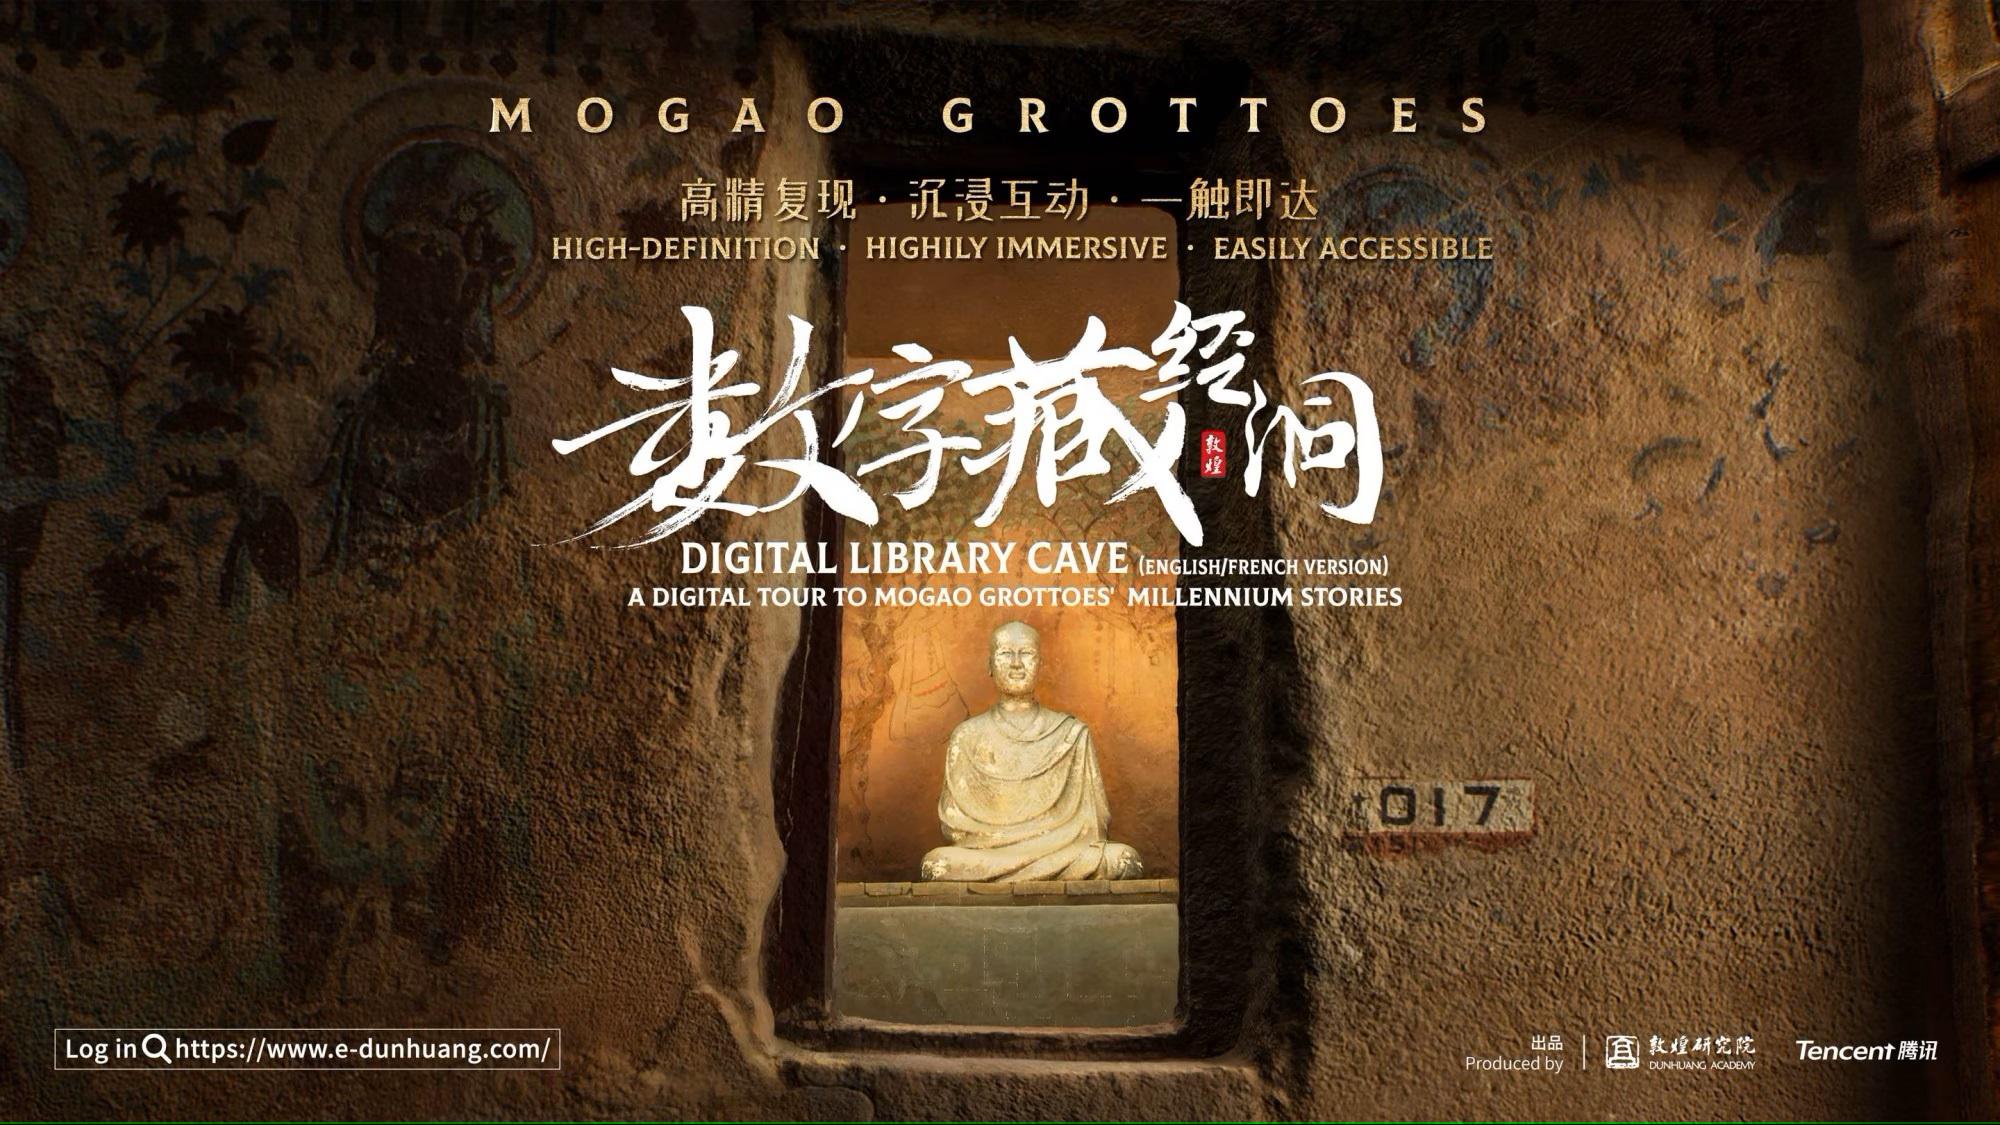 Tencent’s Gaming Technology enhances the Mogao Caves with digital immersion